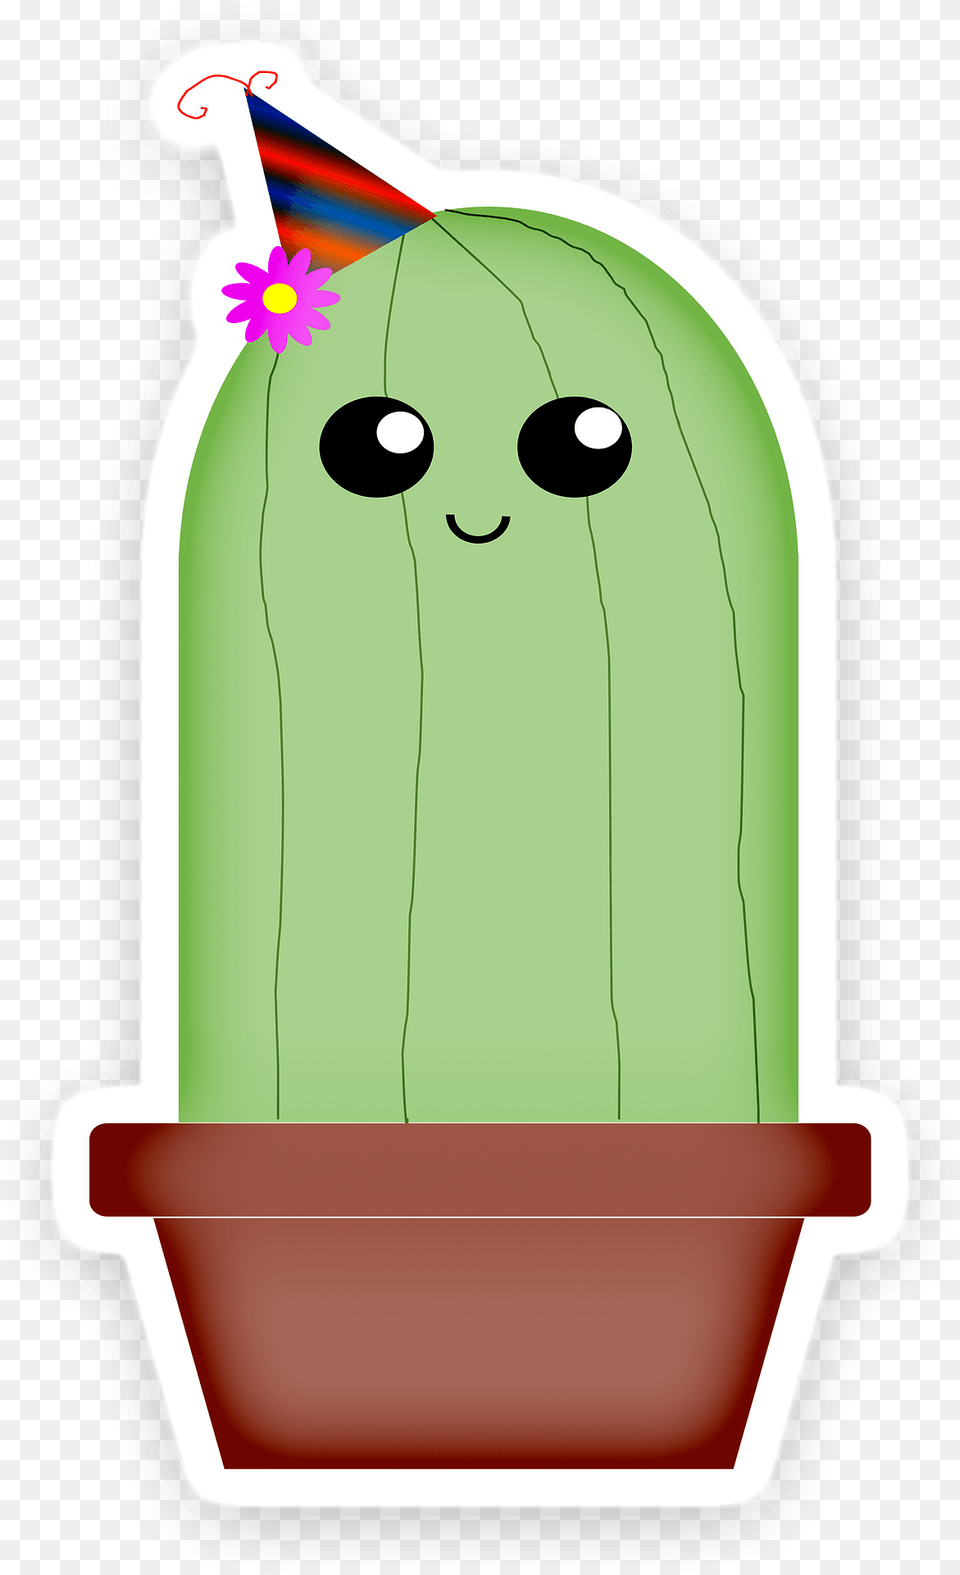 Cute Cactus In Birthday Hat Clipart De Cactus Animados Kawaii, Food, Cucumber, Plant, Produce Png